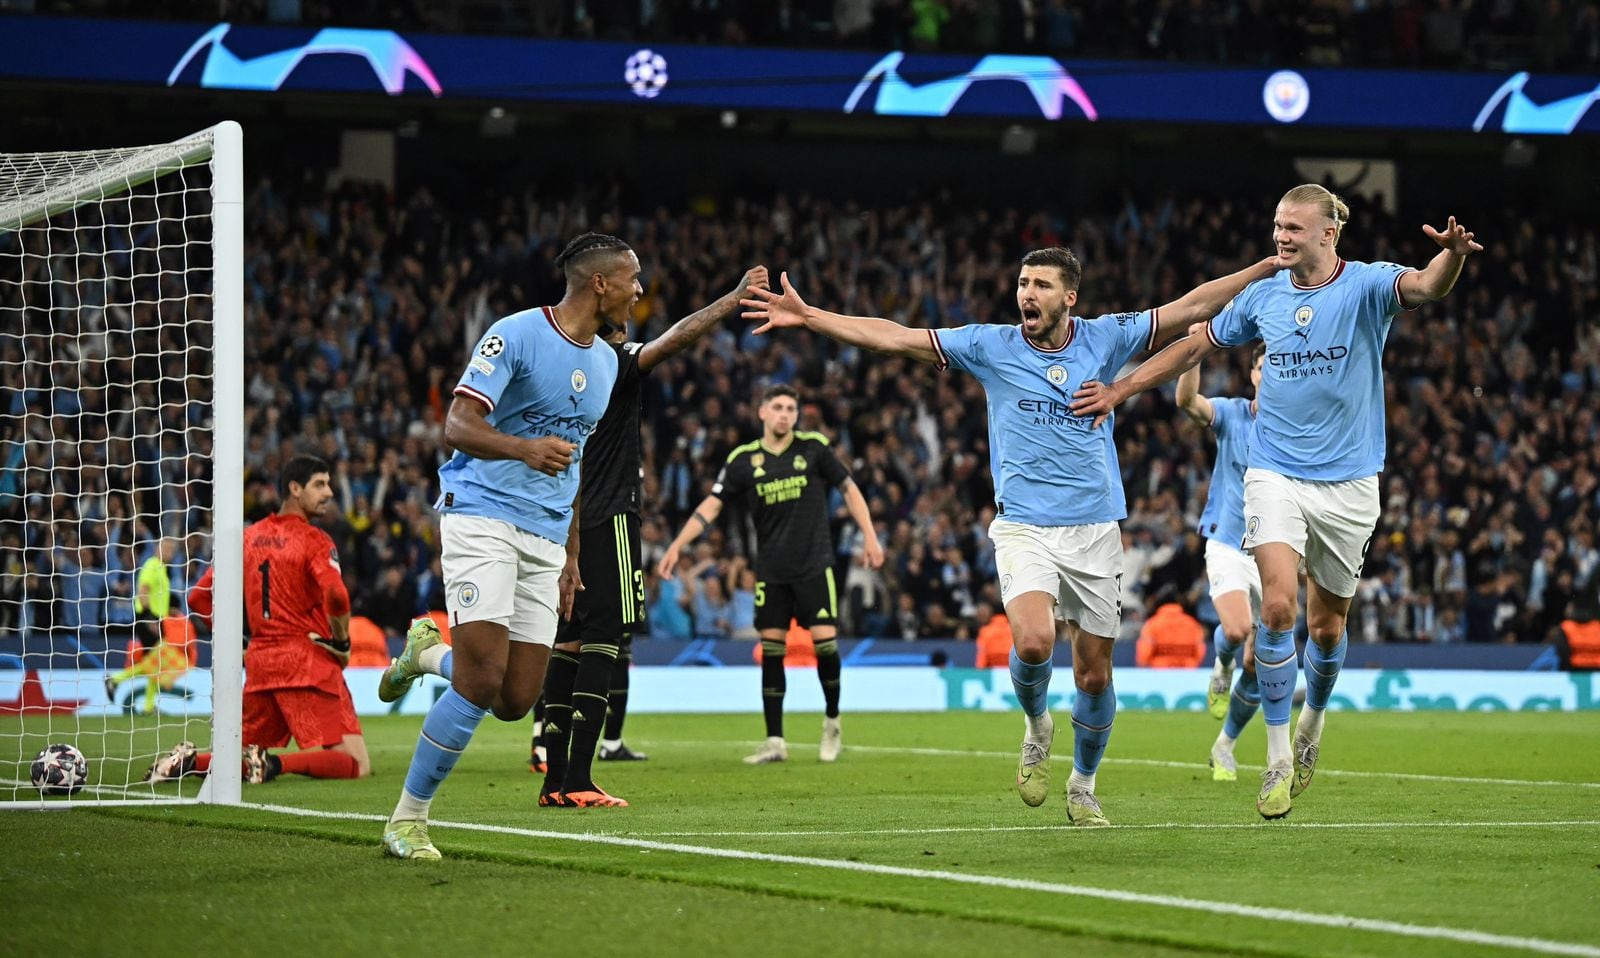 Manchester City dethrones Real Madrid as the most valuable European club